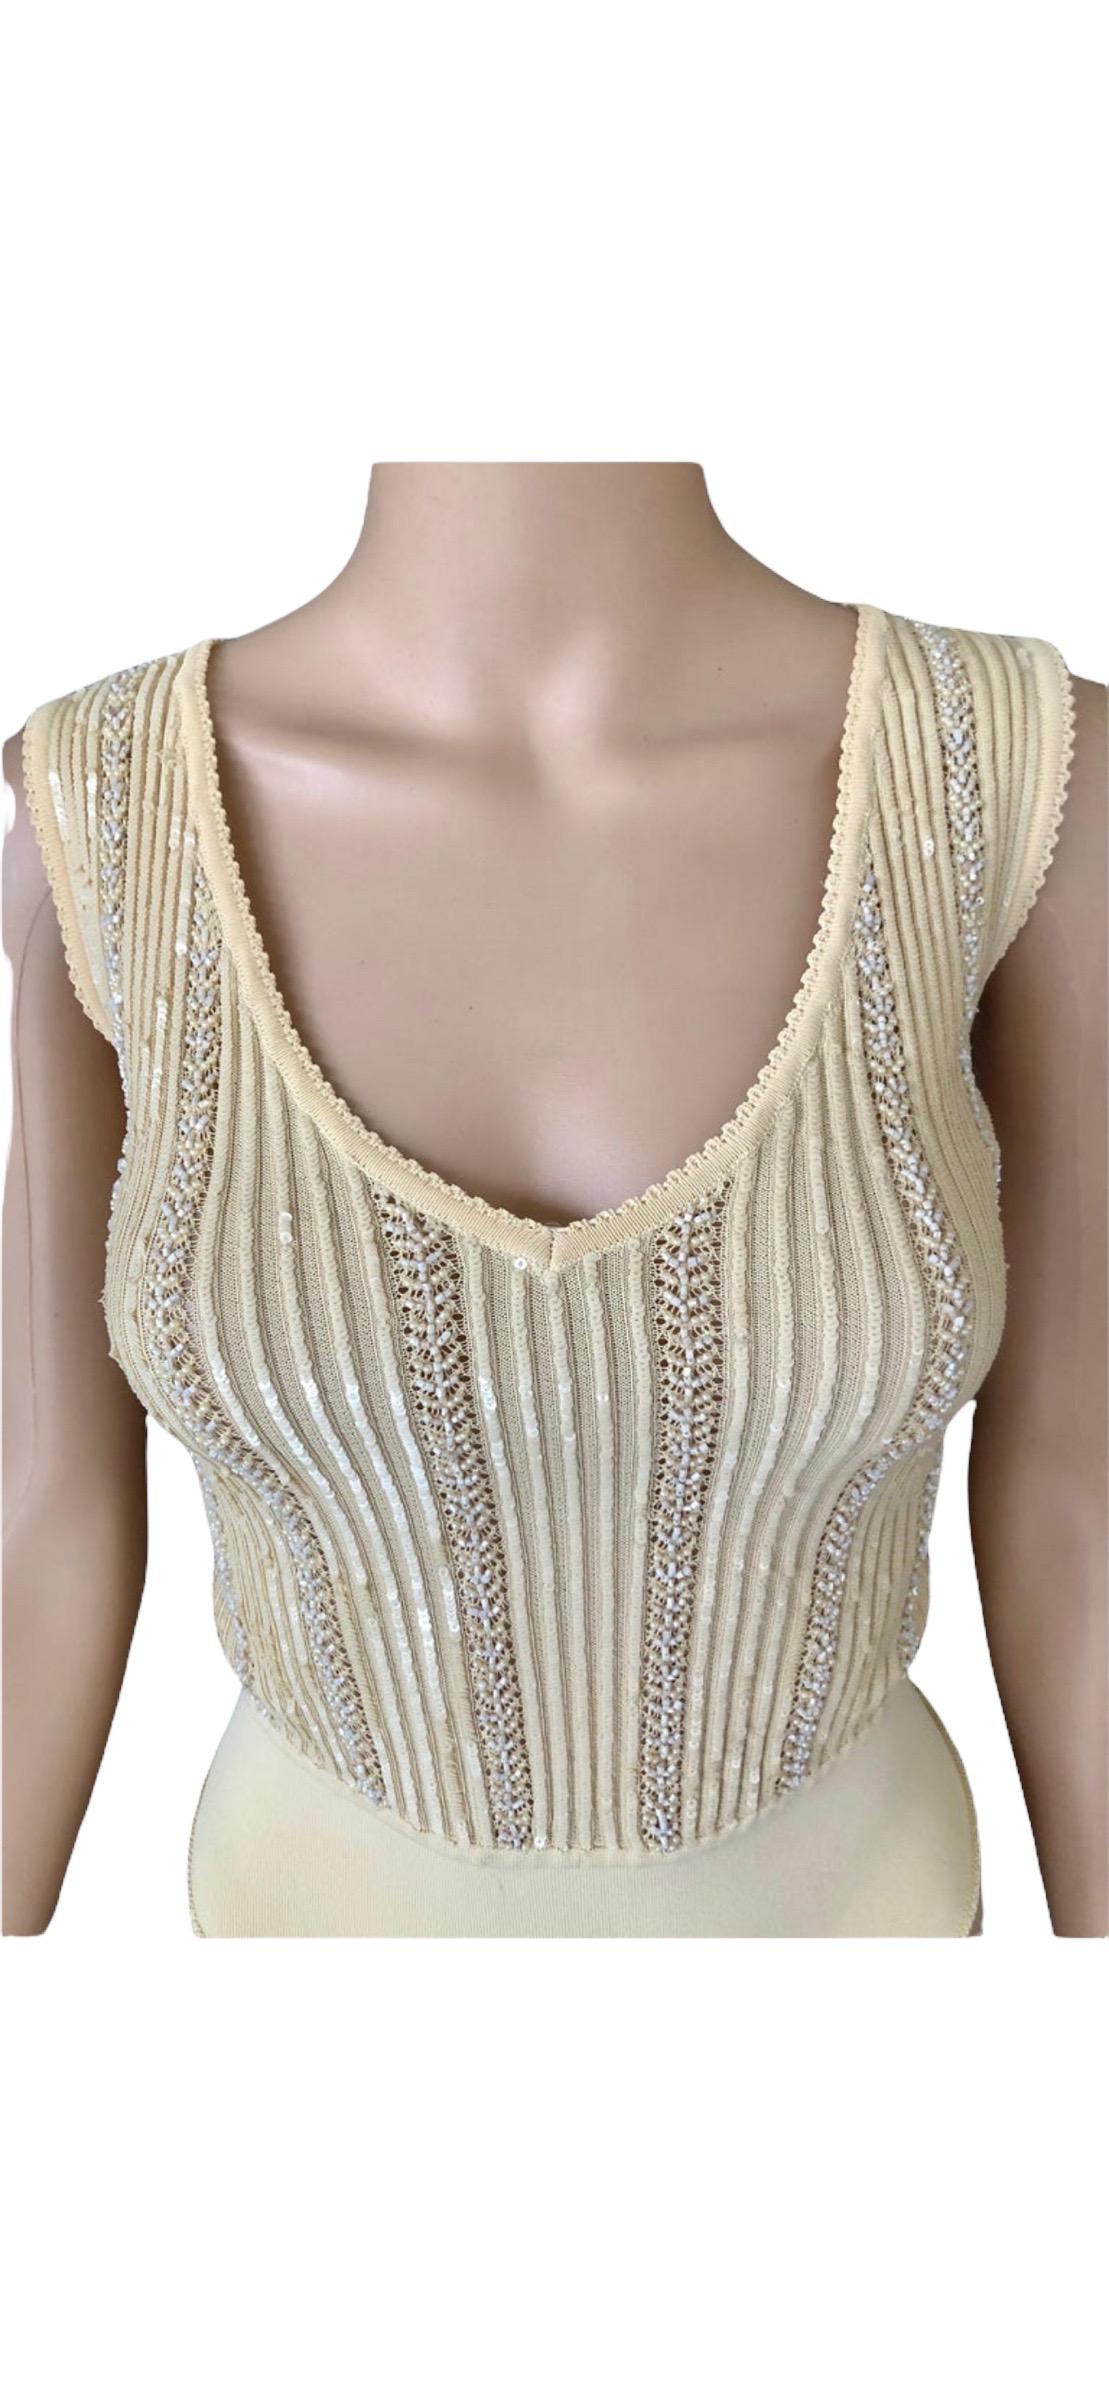 Azzedine Alaia Vintage S/S 1996 Runway Sequin Beaded Embellished Bodysuit Top For Sale 2